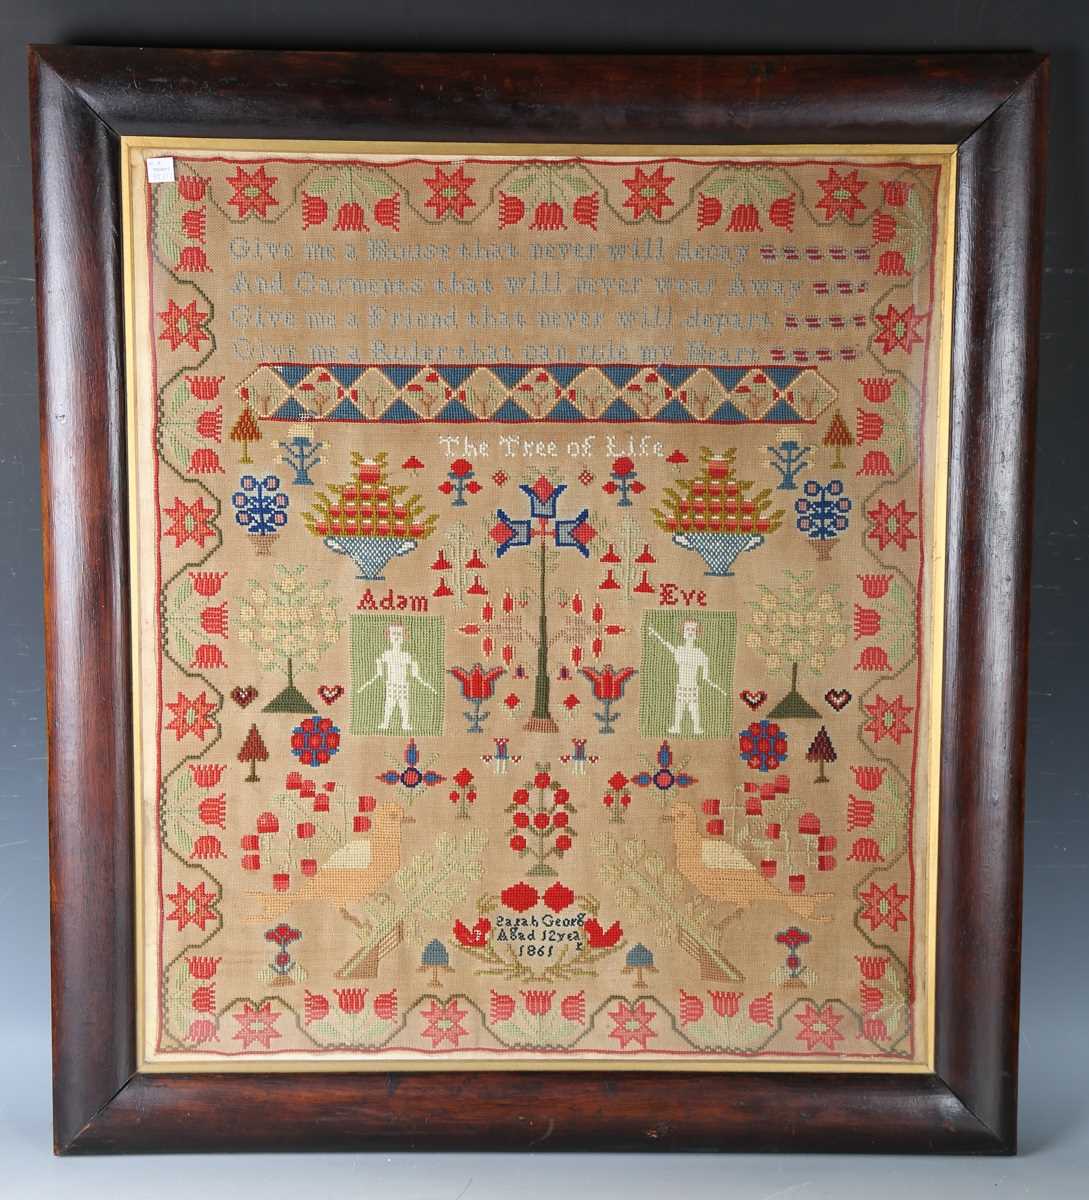 A large mid-Victorian woolwork sampler by Sarah George, aged 12 years, dated 1861, worked in